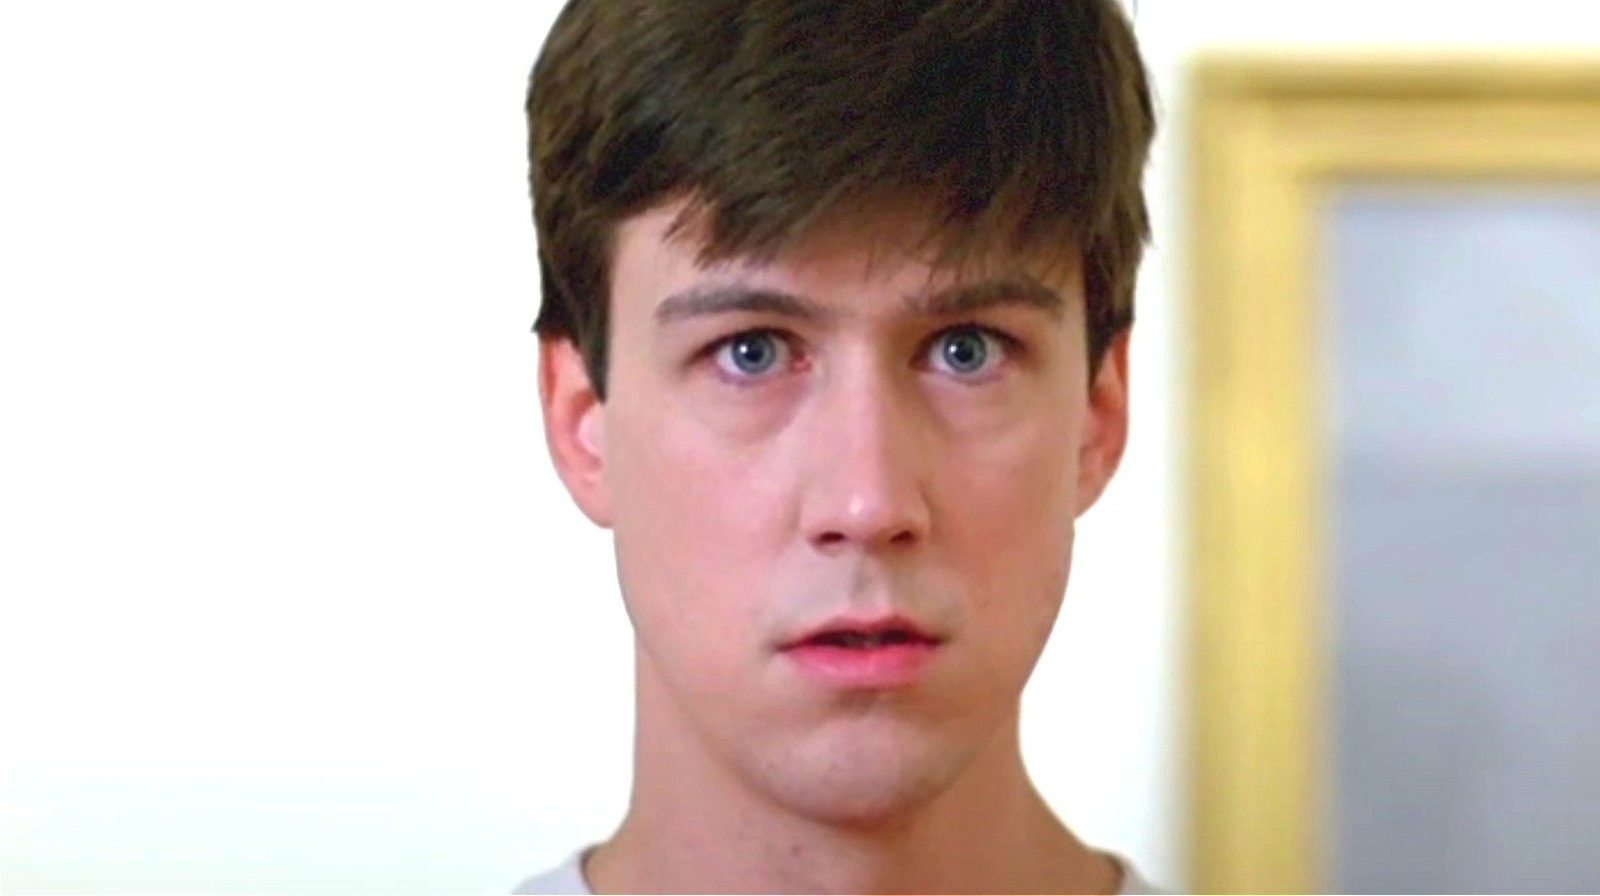 Why Cameron From Ferris Bueller's Day Off Looks So Familiar